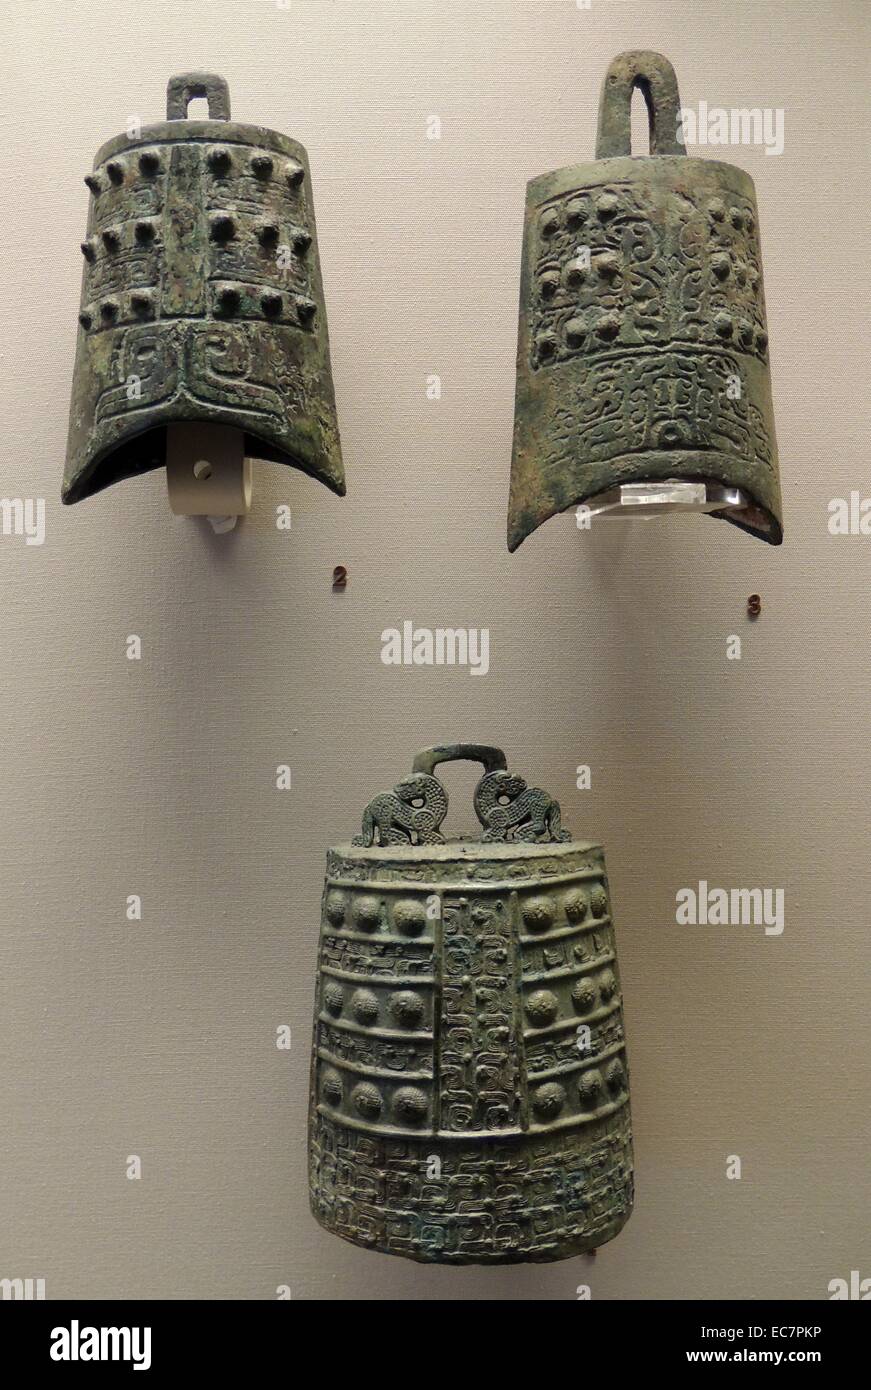 Bronze bell.  Possibly from Southeast China, Early Eastern Zhou, 8th-7th century. The S-shaped dragons retain the form of earlier Western Zhou ornament.  At this date the bronze casting tradition of Southern China was very conservative. Stock Photo